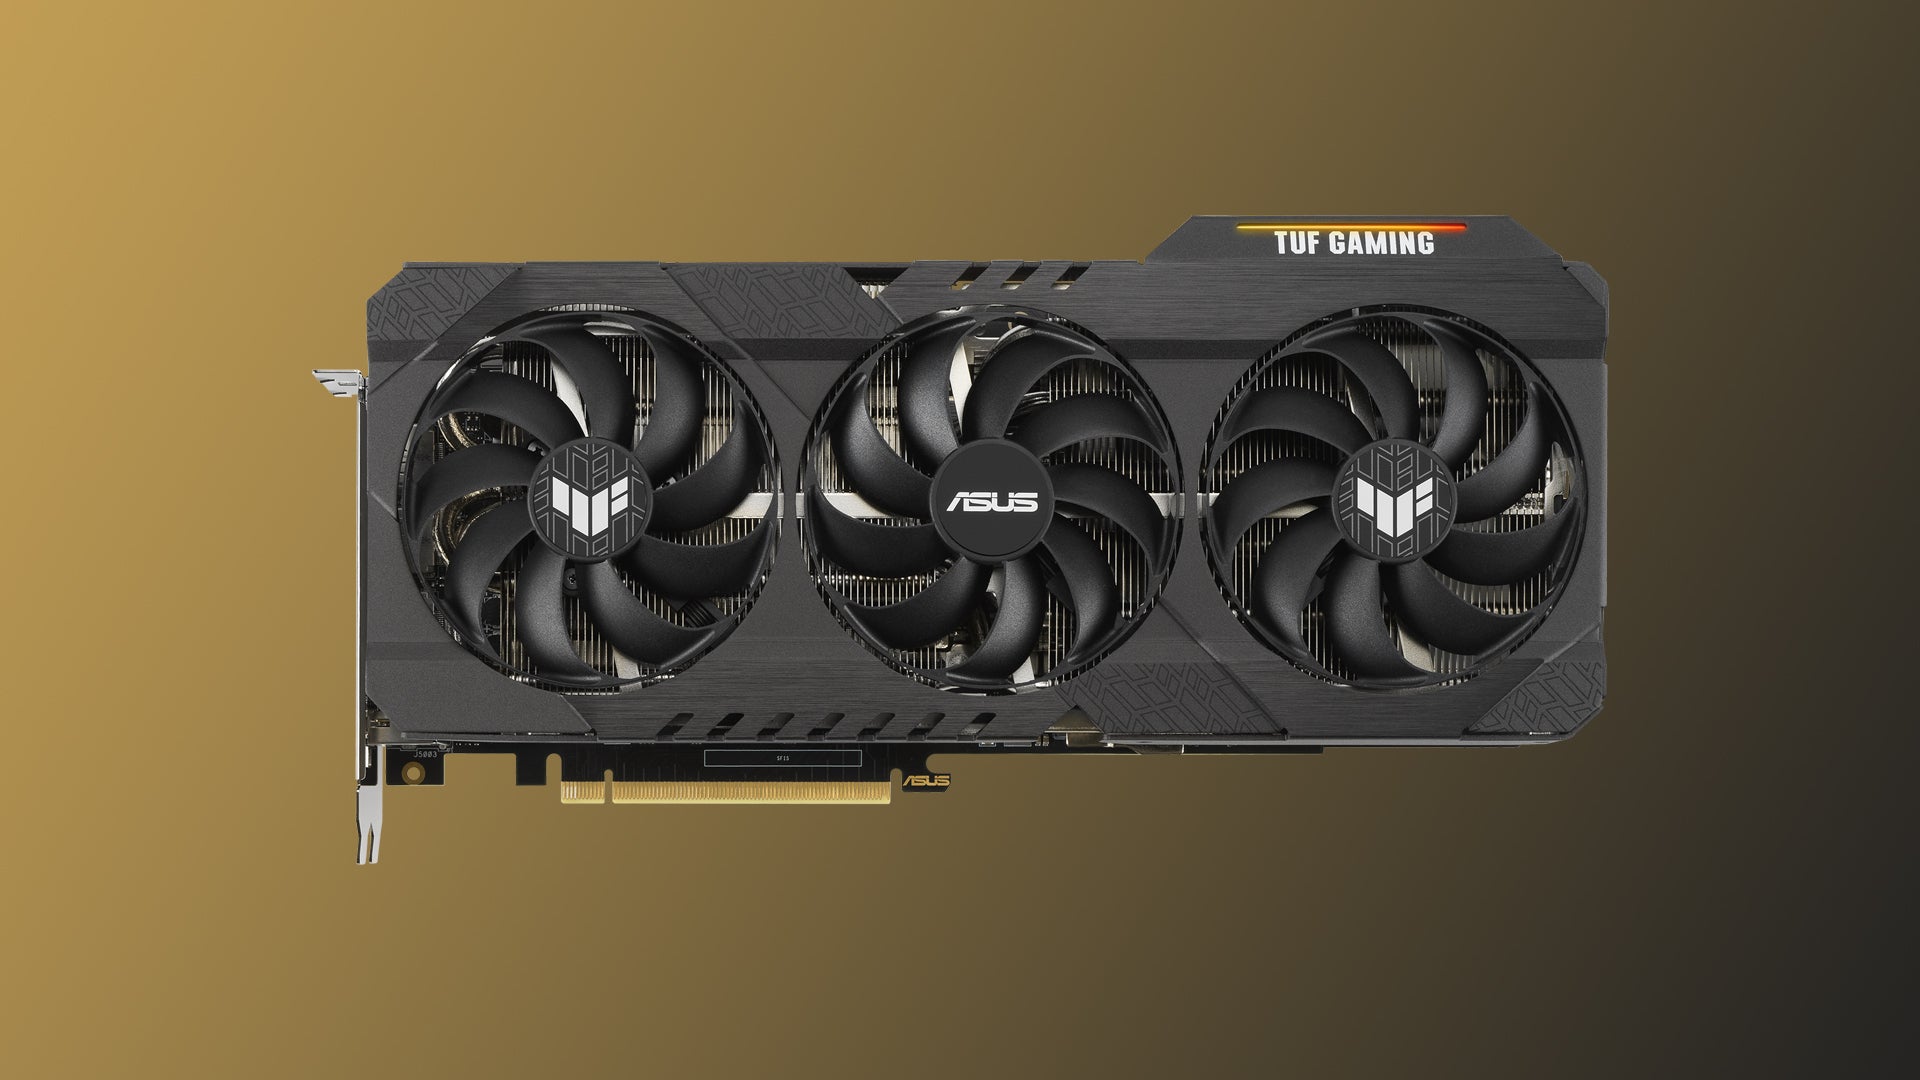 Image of an Asus TUF Gaming RTX 3080 GPU on a gold to black gradient background